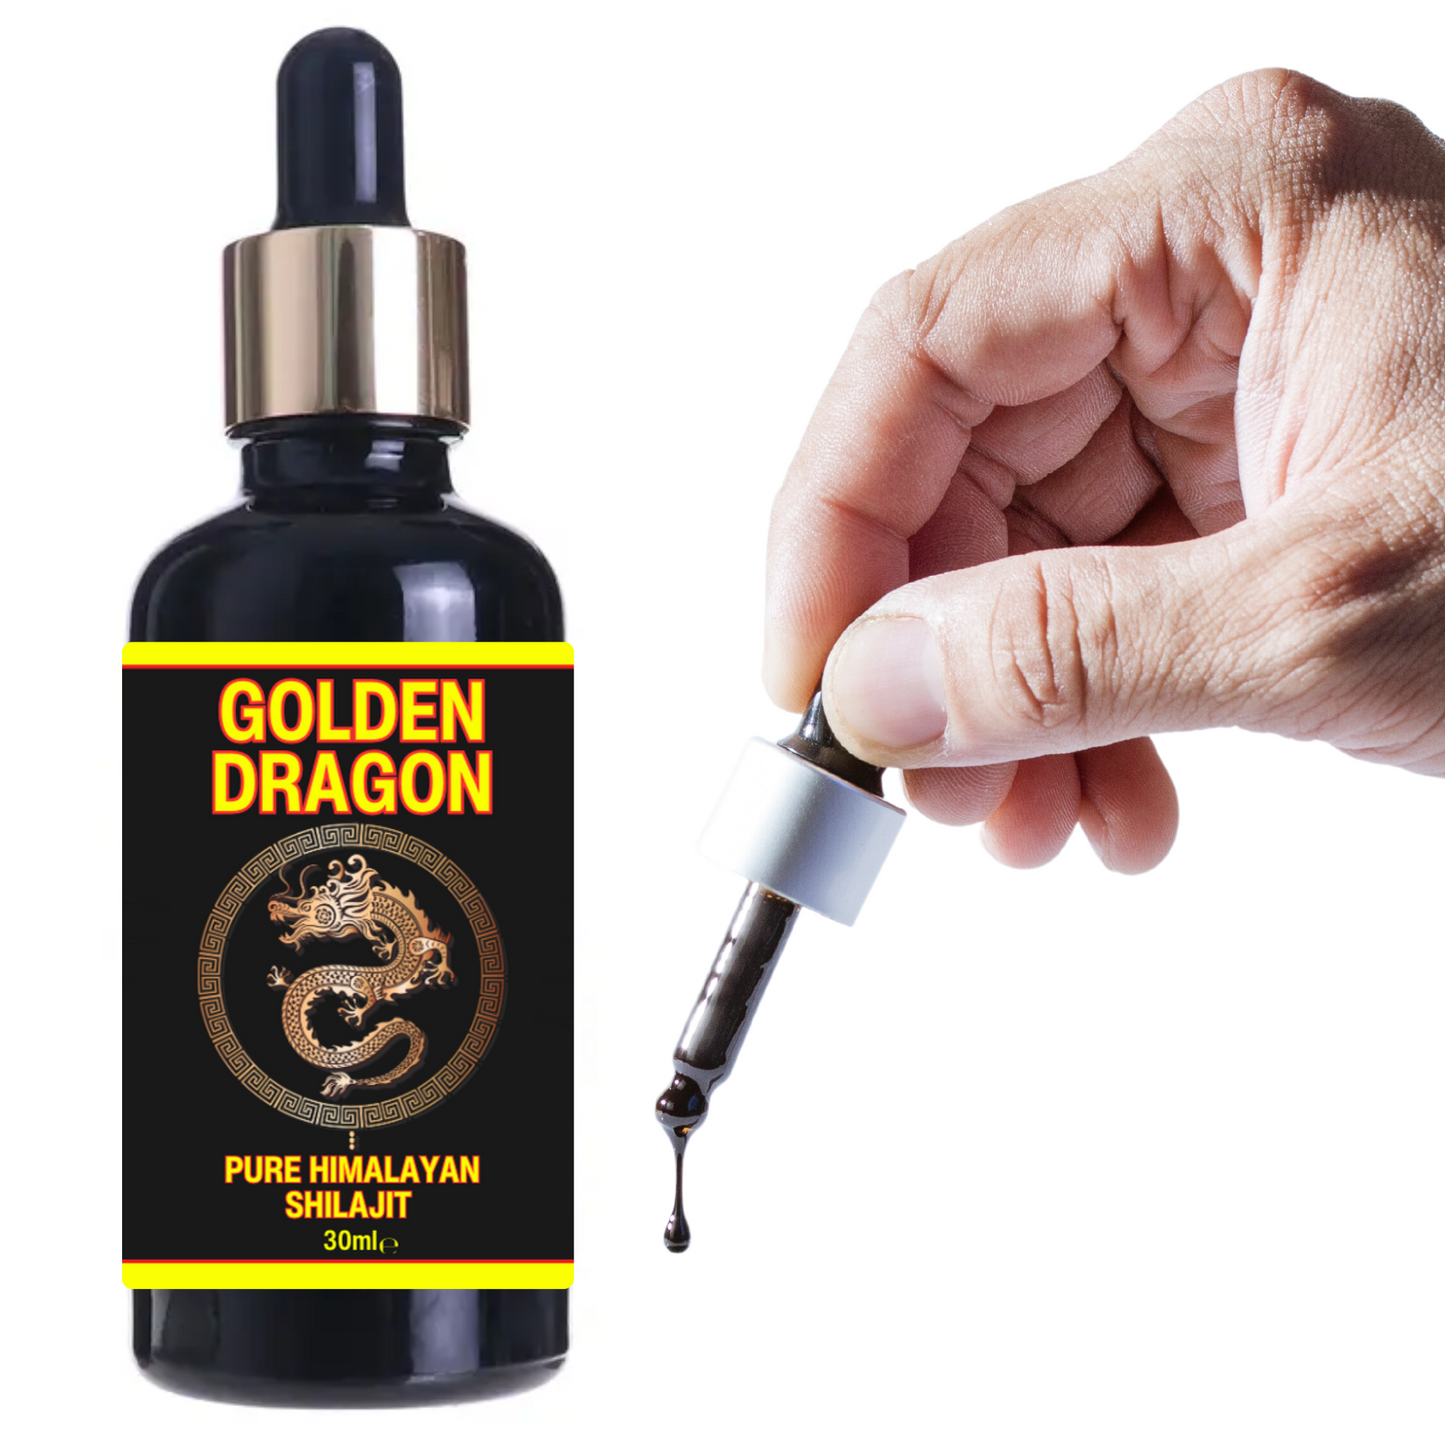 Buy Golden Dragon 30ml Himalayan Shilajit Liquid Drops Tincture Pure Mineral Resin Dropper Bottle. Potent, Ayurvedic & High Strength - Unlike cheaper alternatives, Golden Dragon Shilajit is tested against heavy metals, vapourised & extracted with nothing other than purified water & no other elements, to ensure a safe and pure product. Golden Dragon Shilajit is a plant-based mineral complex that is known to have over 85 different minerals and trace elements in an ionic and bioavailable form. Shilajit also co